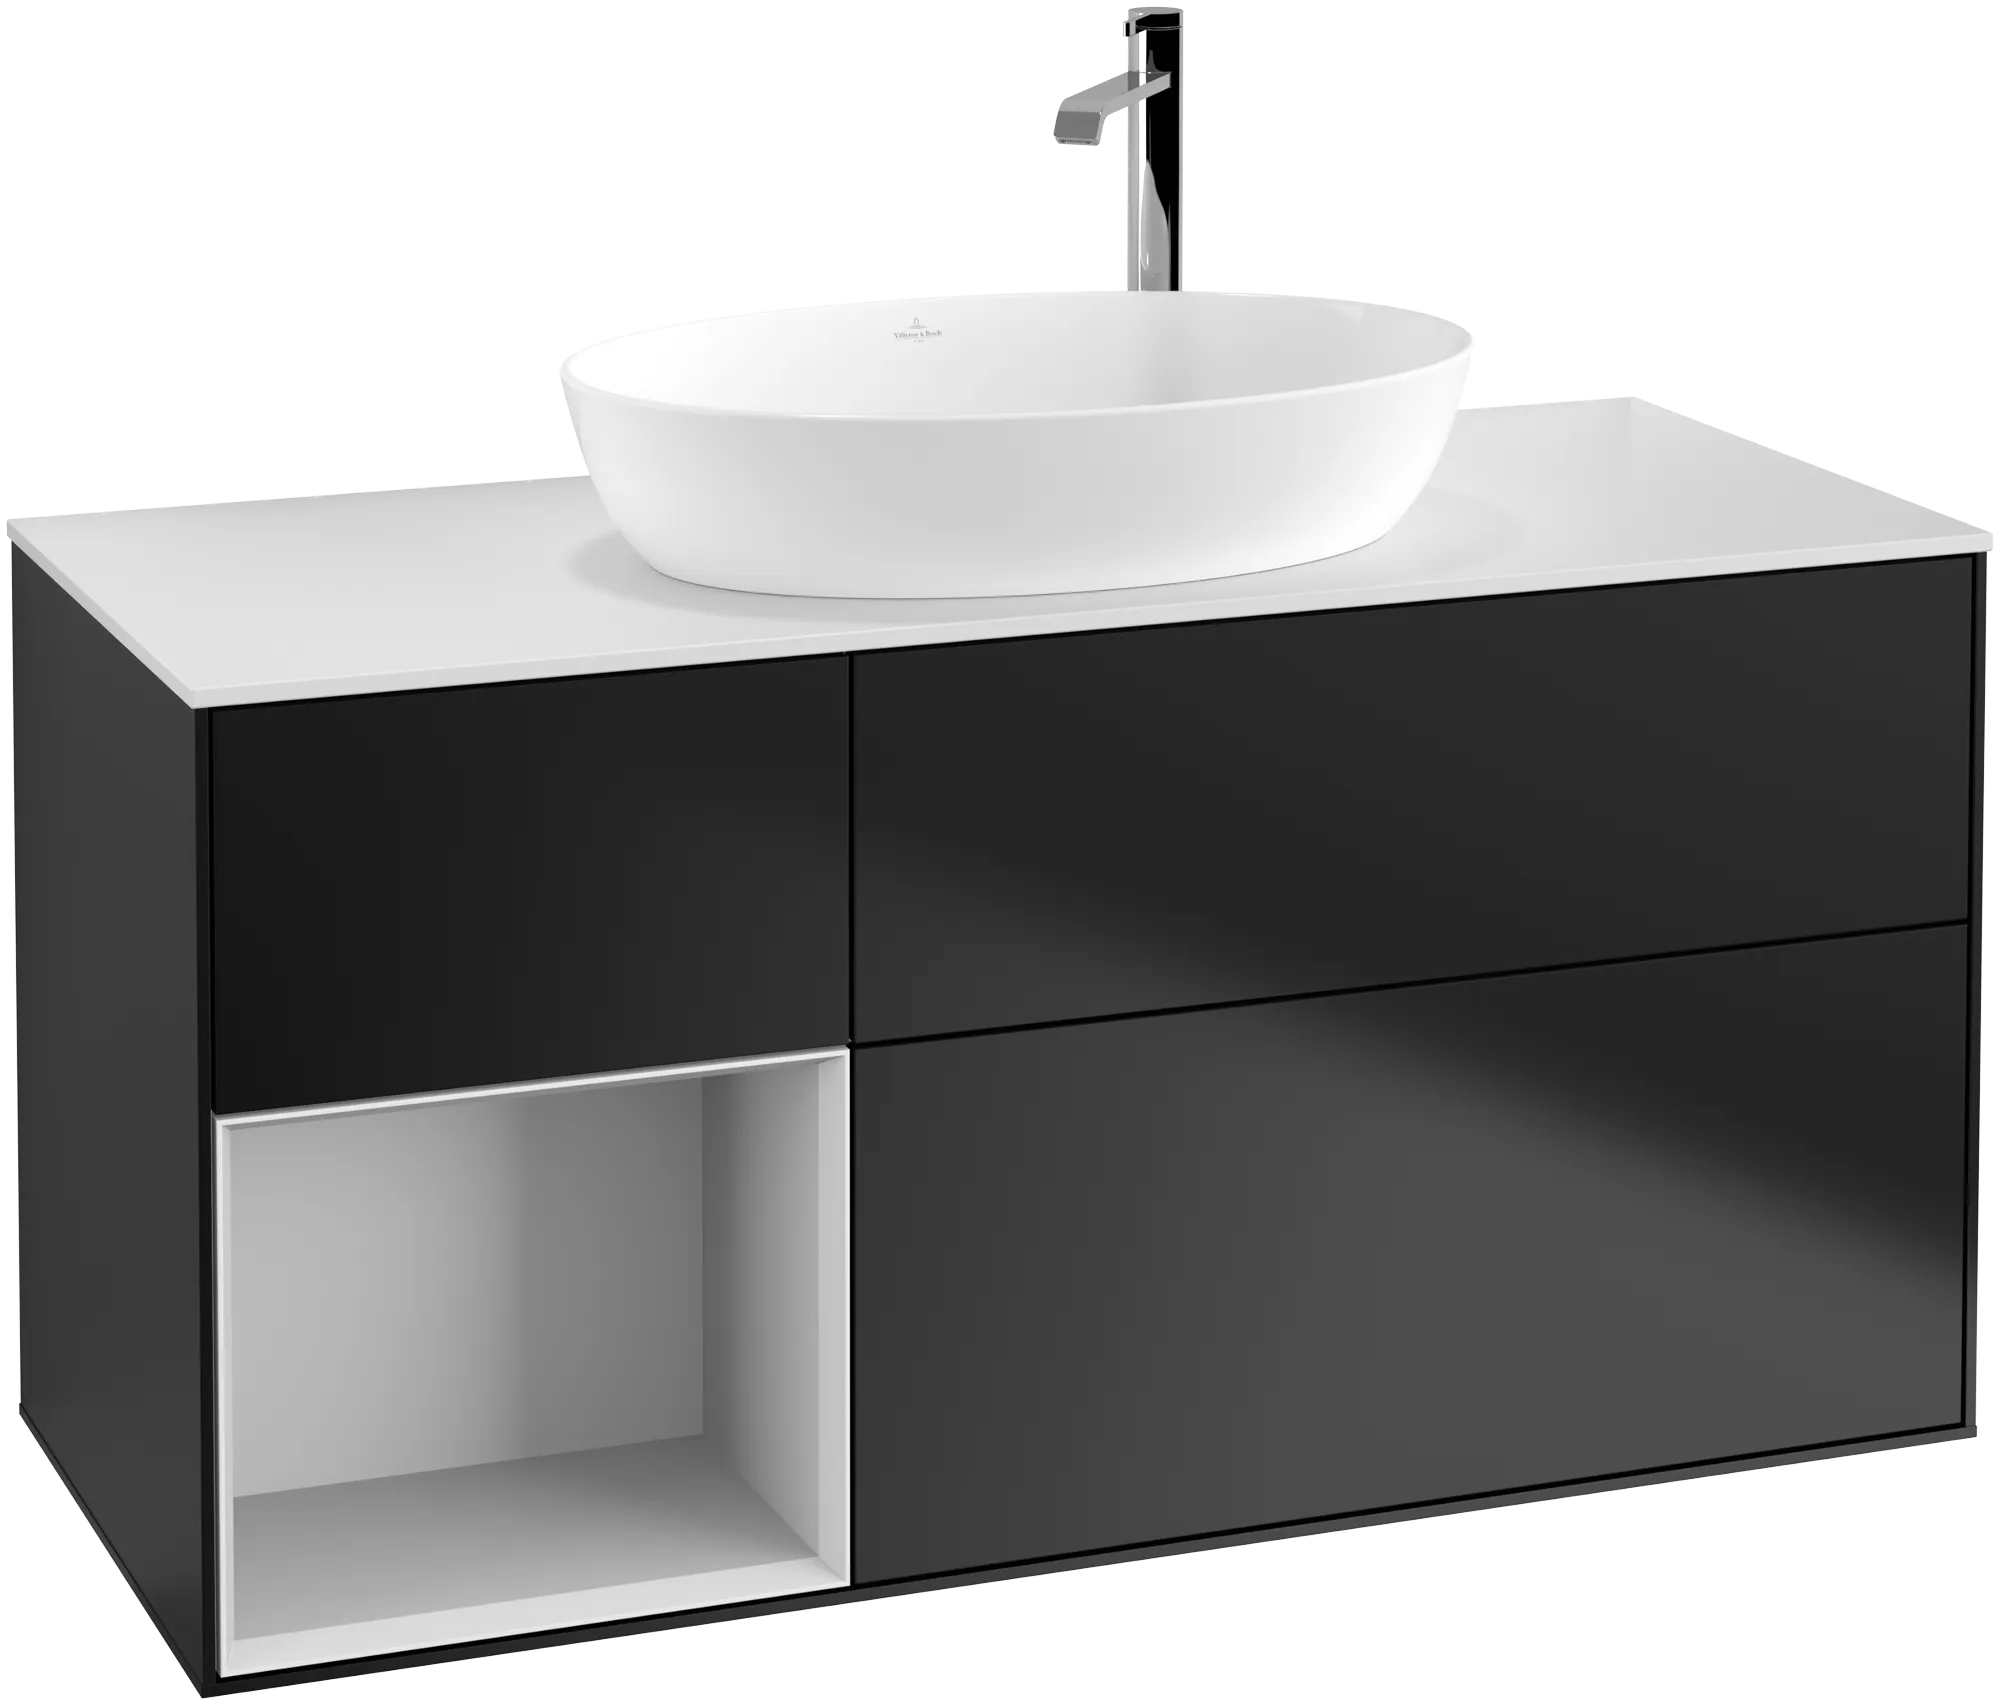 Obrázek VILLEROY BOCH Finion Vanity unit, with lighting, 3 pull-out compartments, 1200 x 603 x 501 mm, Black Matt Lacquer / White Matt Lacquer / Glass White Matt #G941MTPD